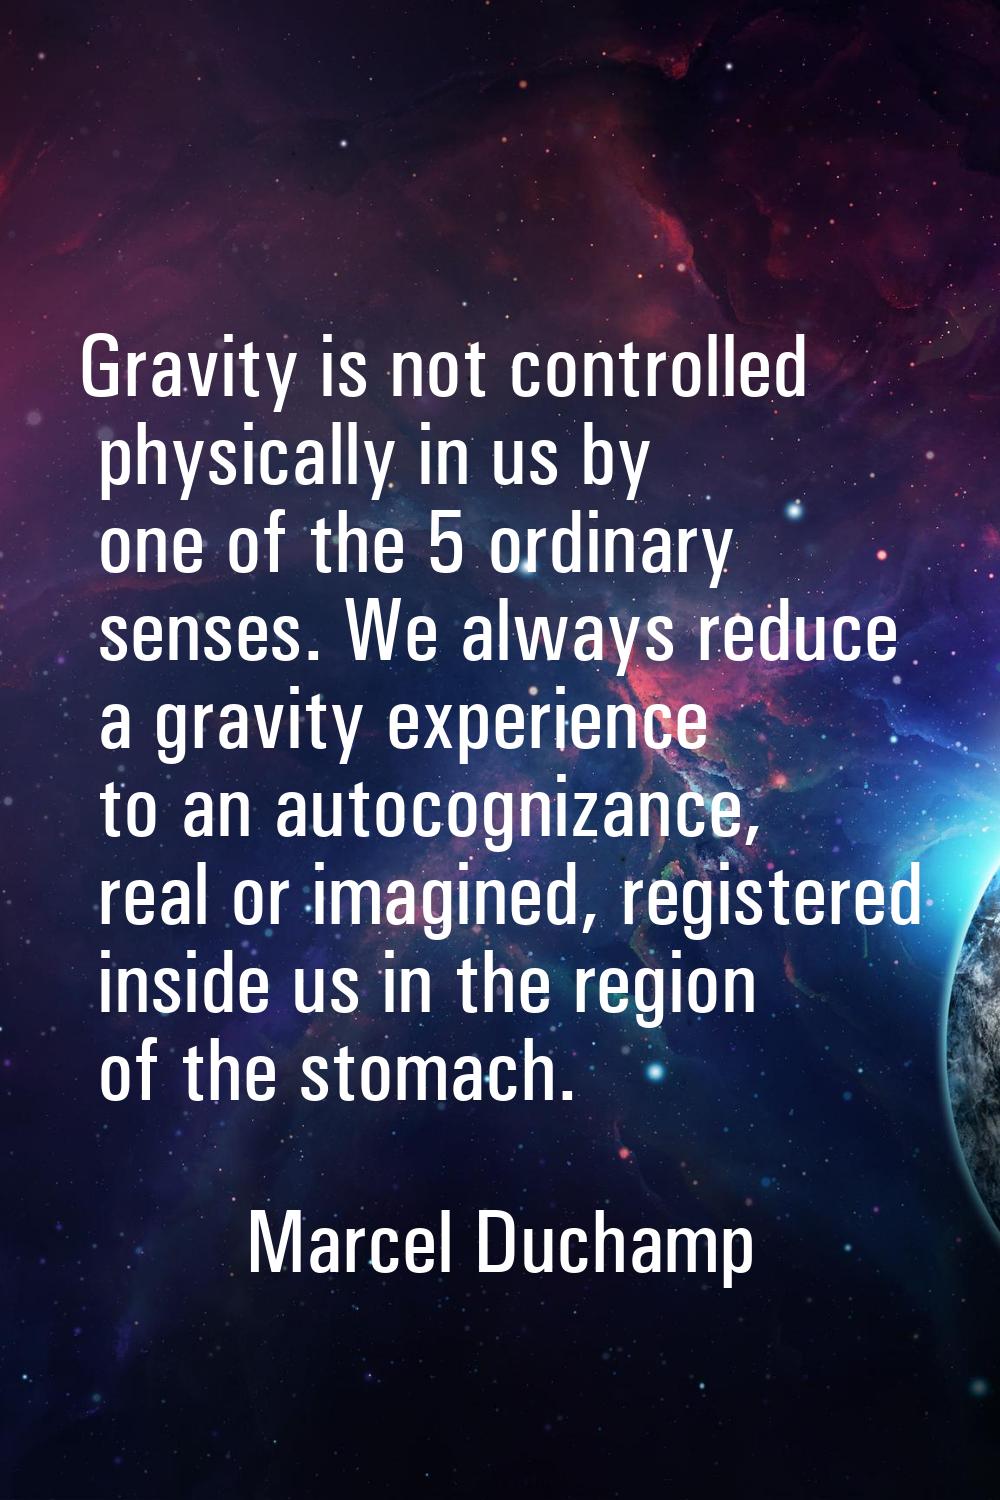 Gravity is not controlled physically in us by one of the 5 ordinary senses. We always reduce a grav